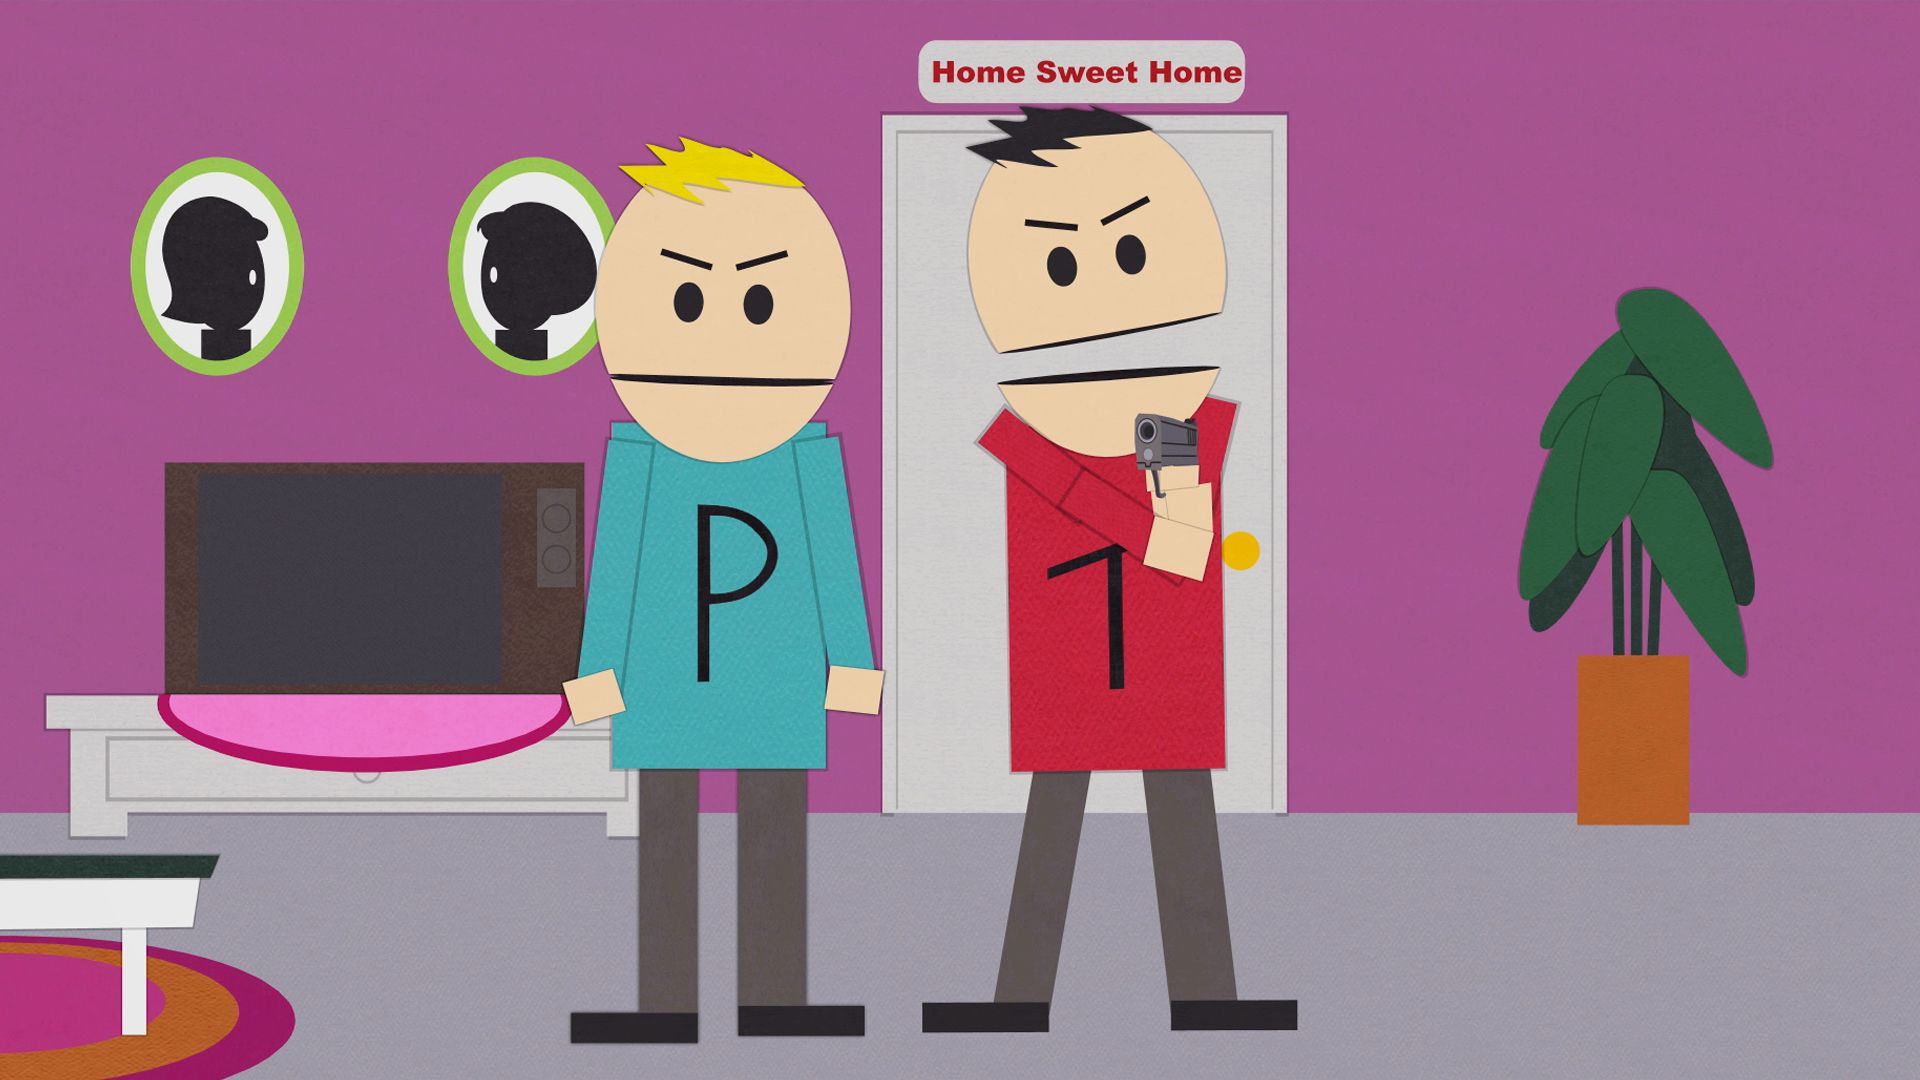 It's An Honor To Meet You - Season 13 Episode 4 - South Park